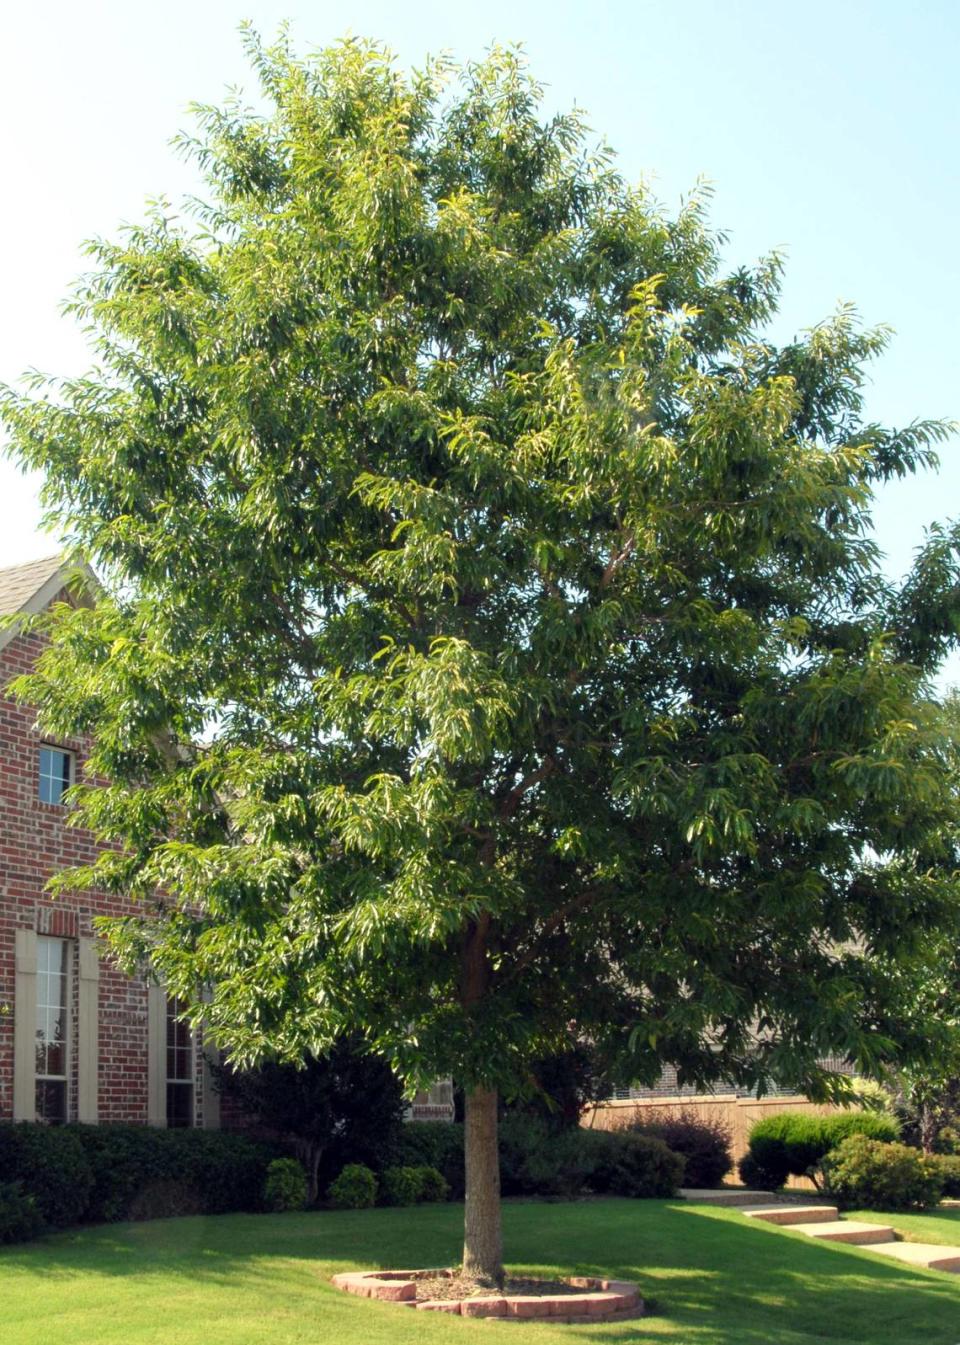 Chinquapin oaks are large, oval to rounded trees to 50 feet tall and 40 to 50 feet wide.